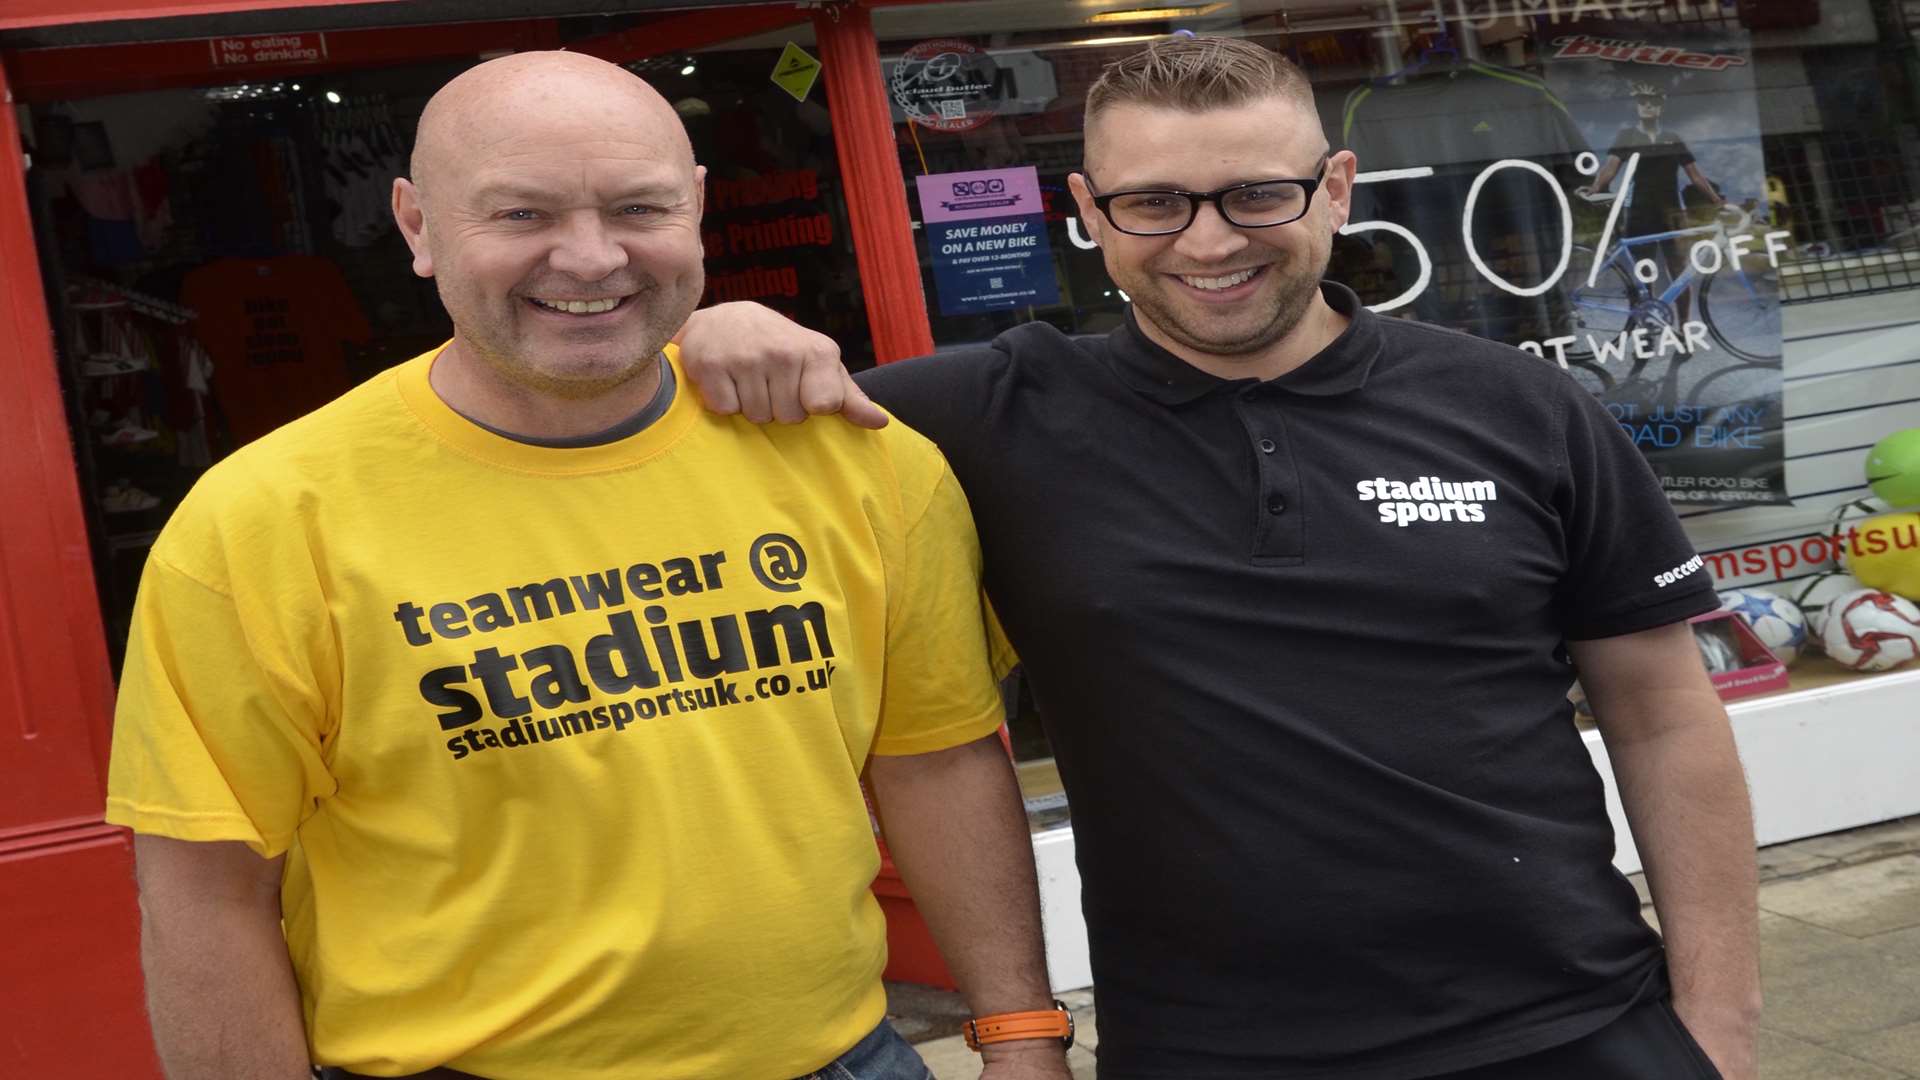 Mark Roach and Karl O' Brien are closing their Stadium Sports store to concentrate on their online business